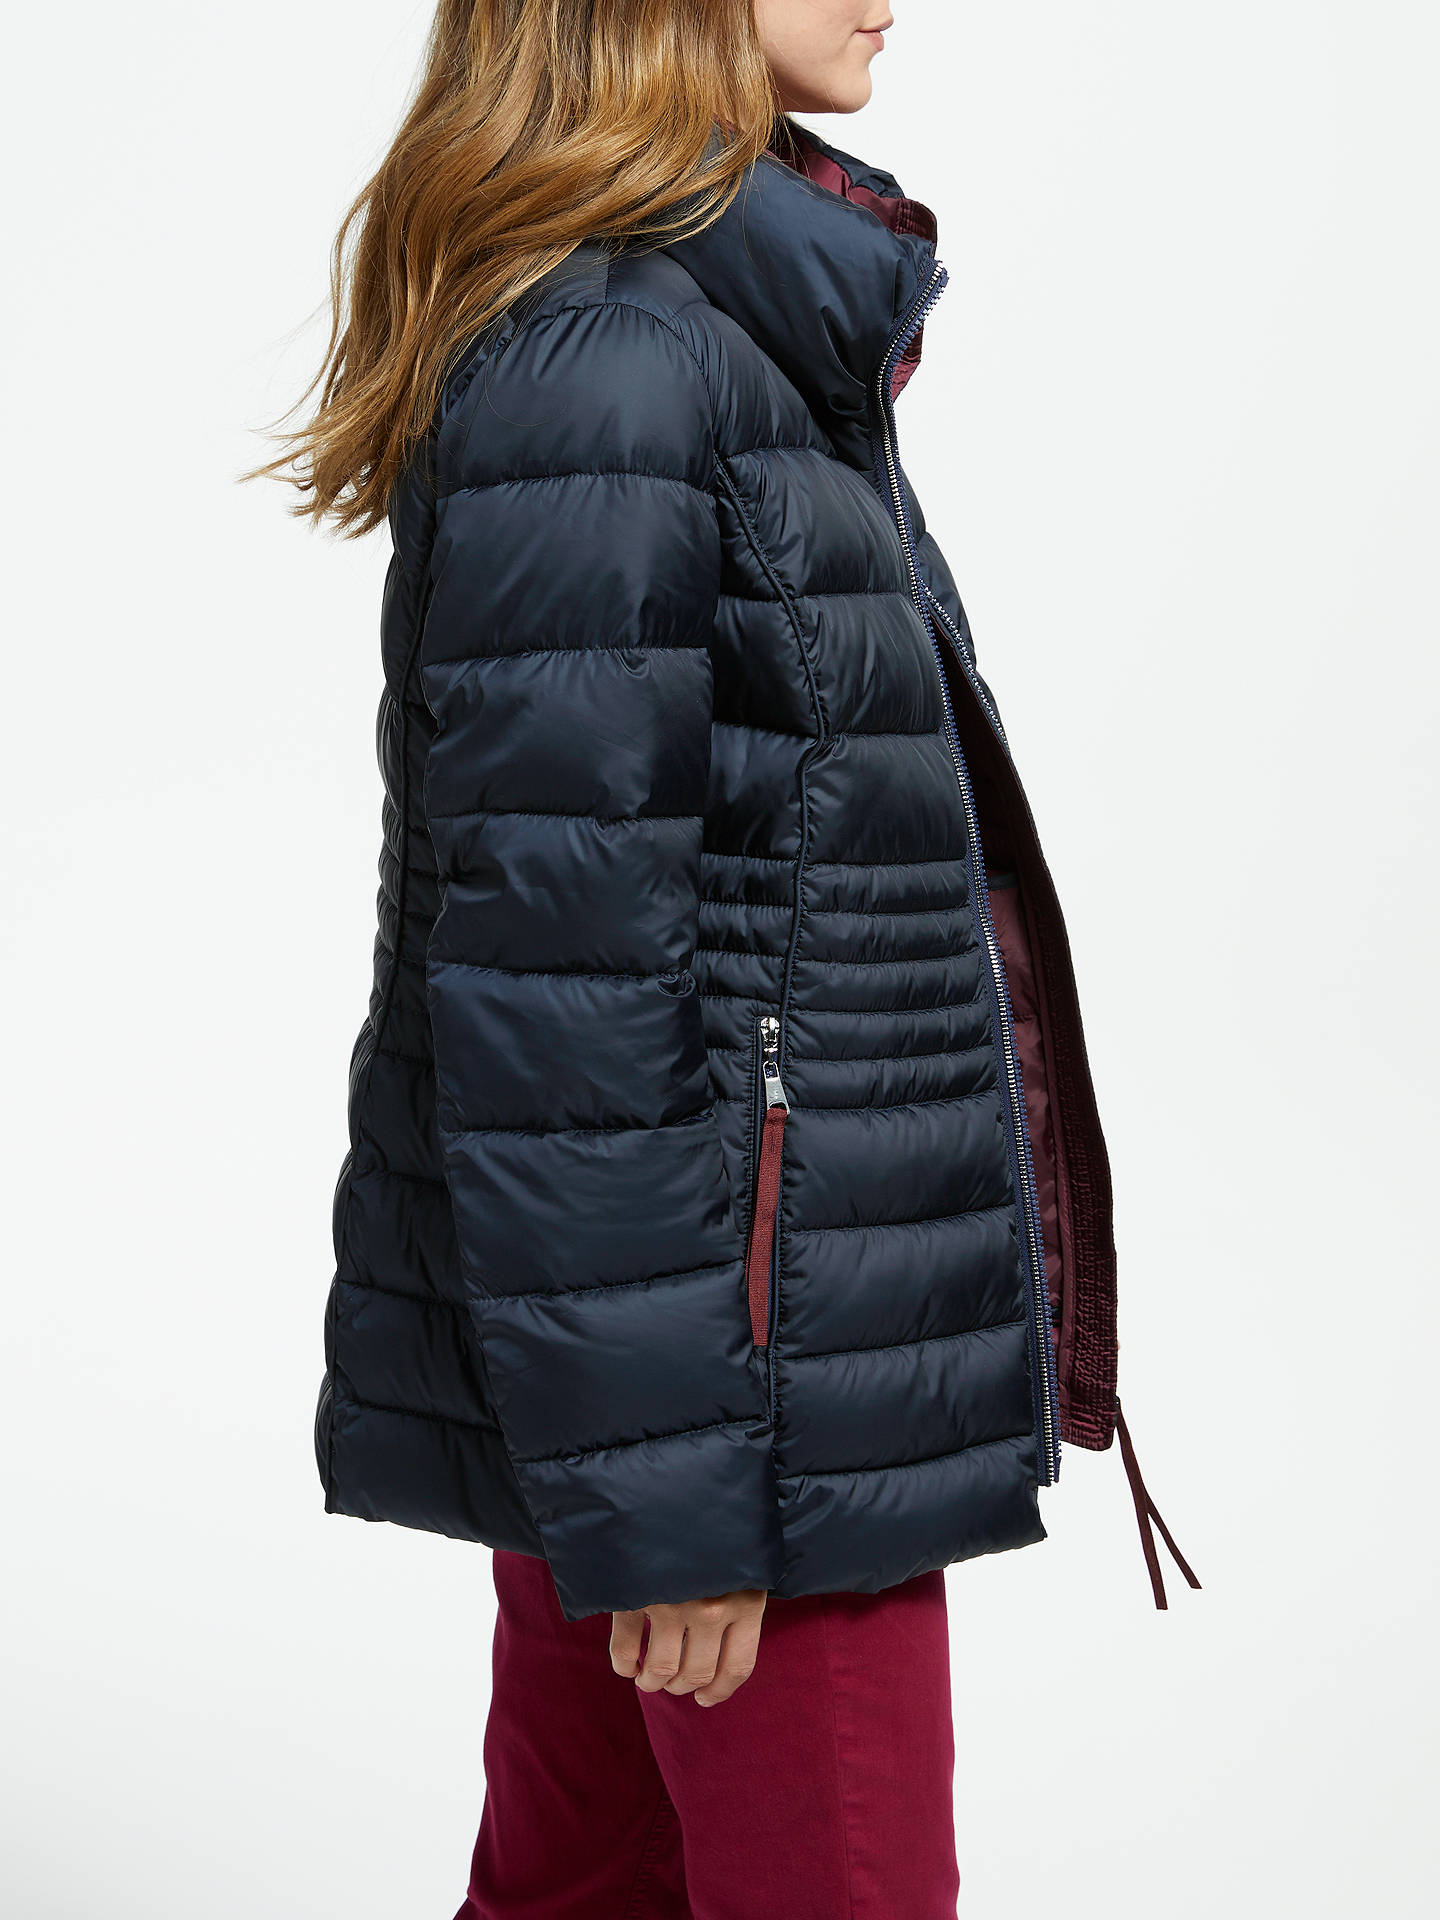 Gerry Weber Quilted Jacket at John Lewis & Partners